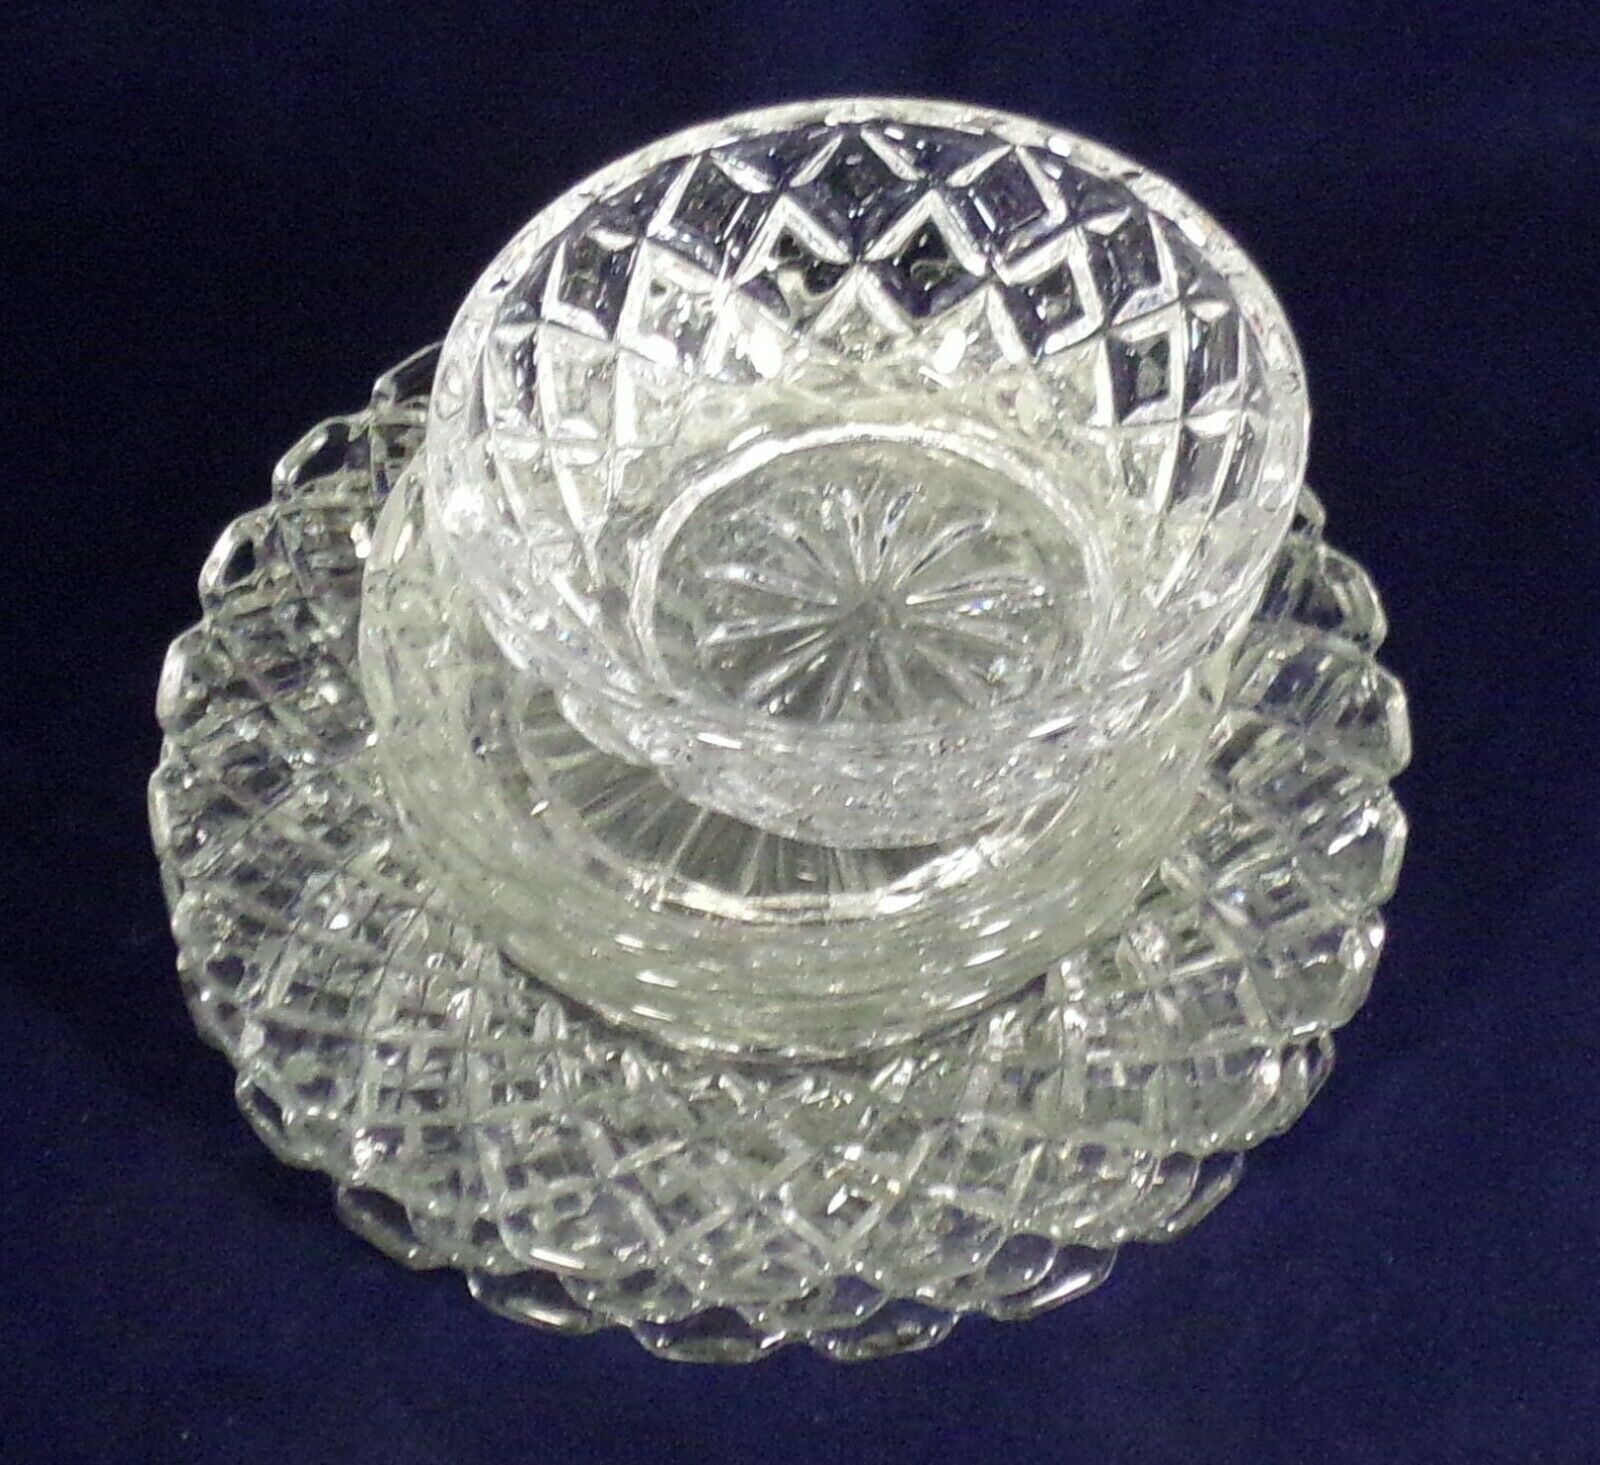 Hocking Lot 7 Waterford Waffle Clear 3 Bread Plates 3 Coasters & Small Bowl